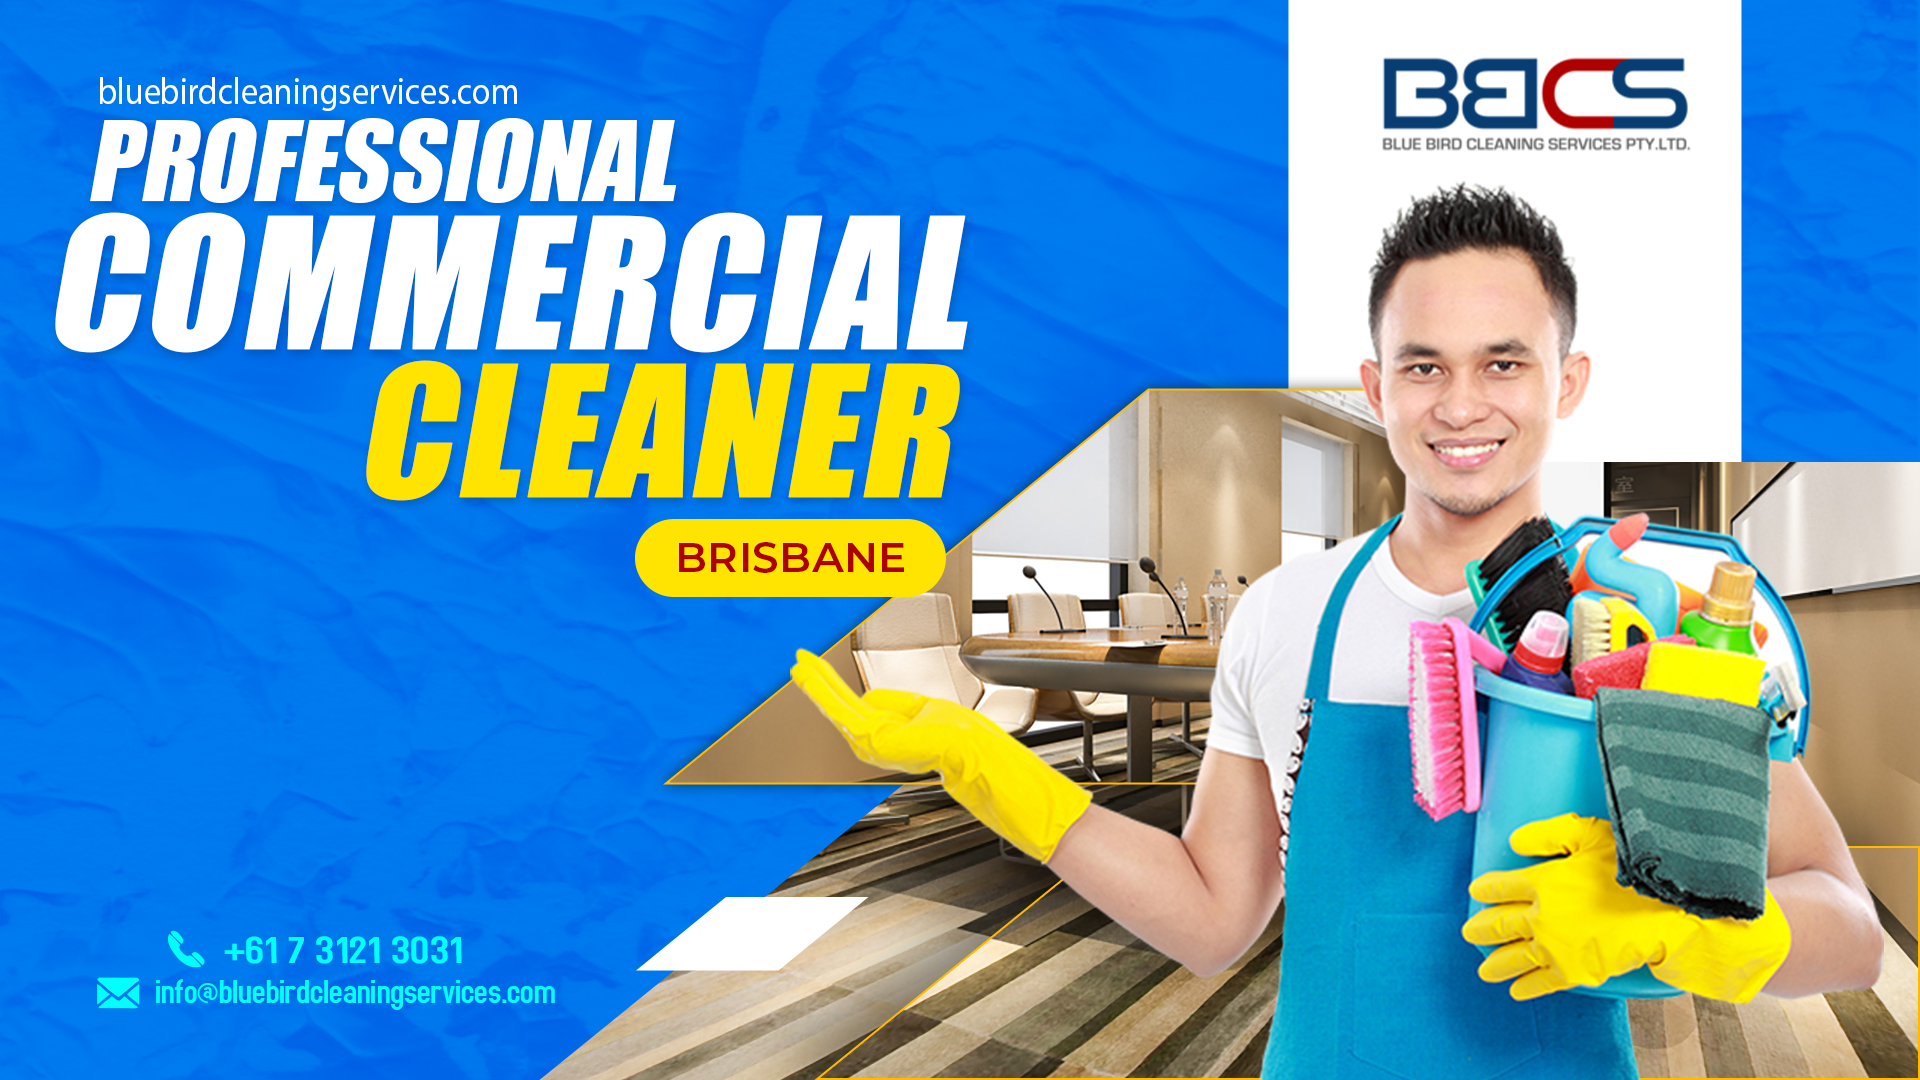 Professional Commercial Cleaner- Professional Cleaning at Affordable Prices